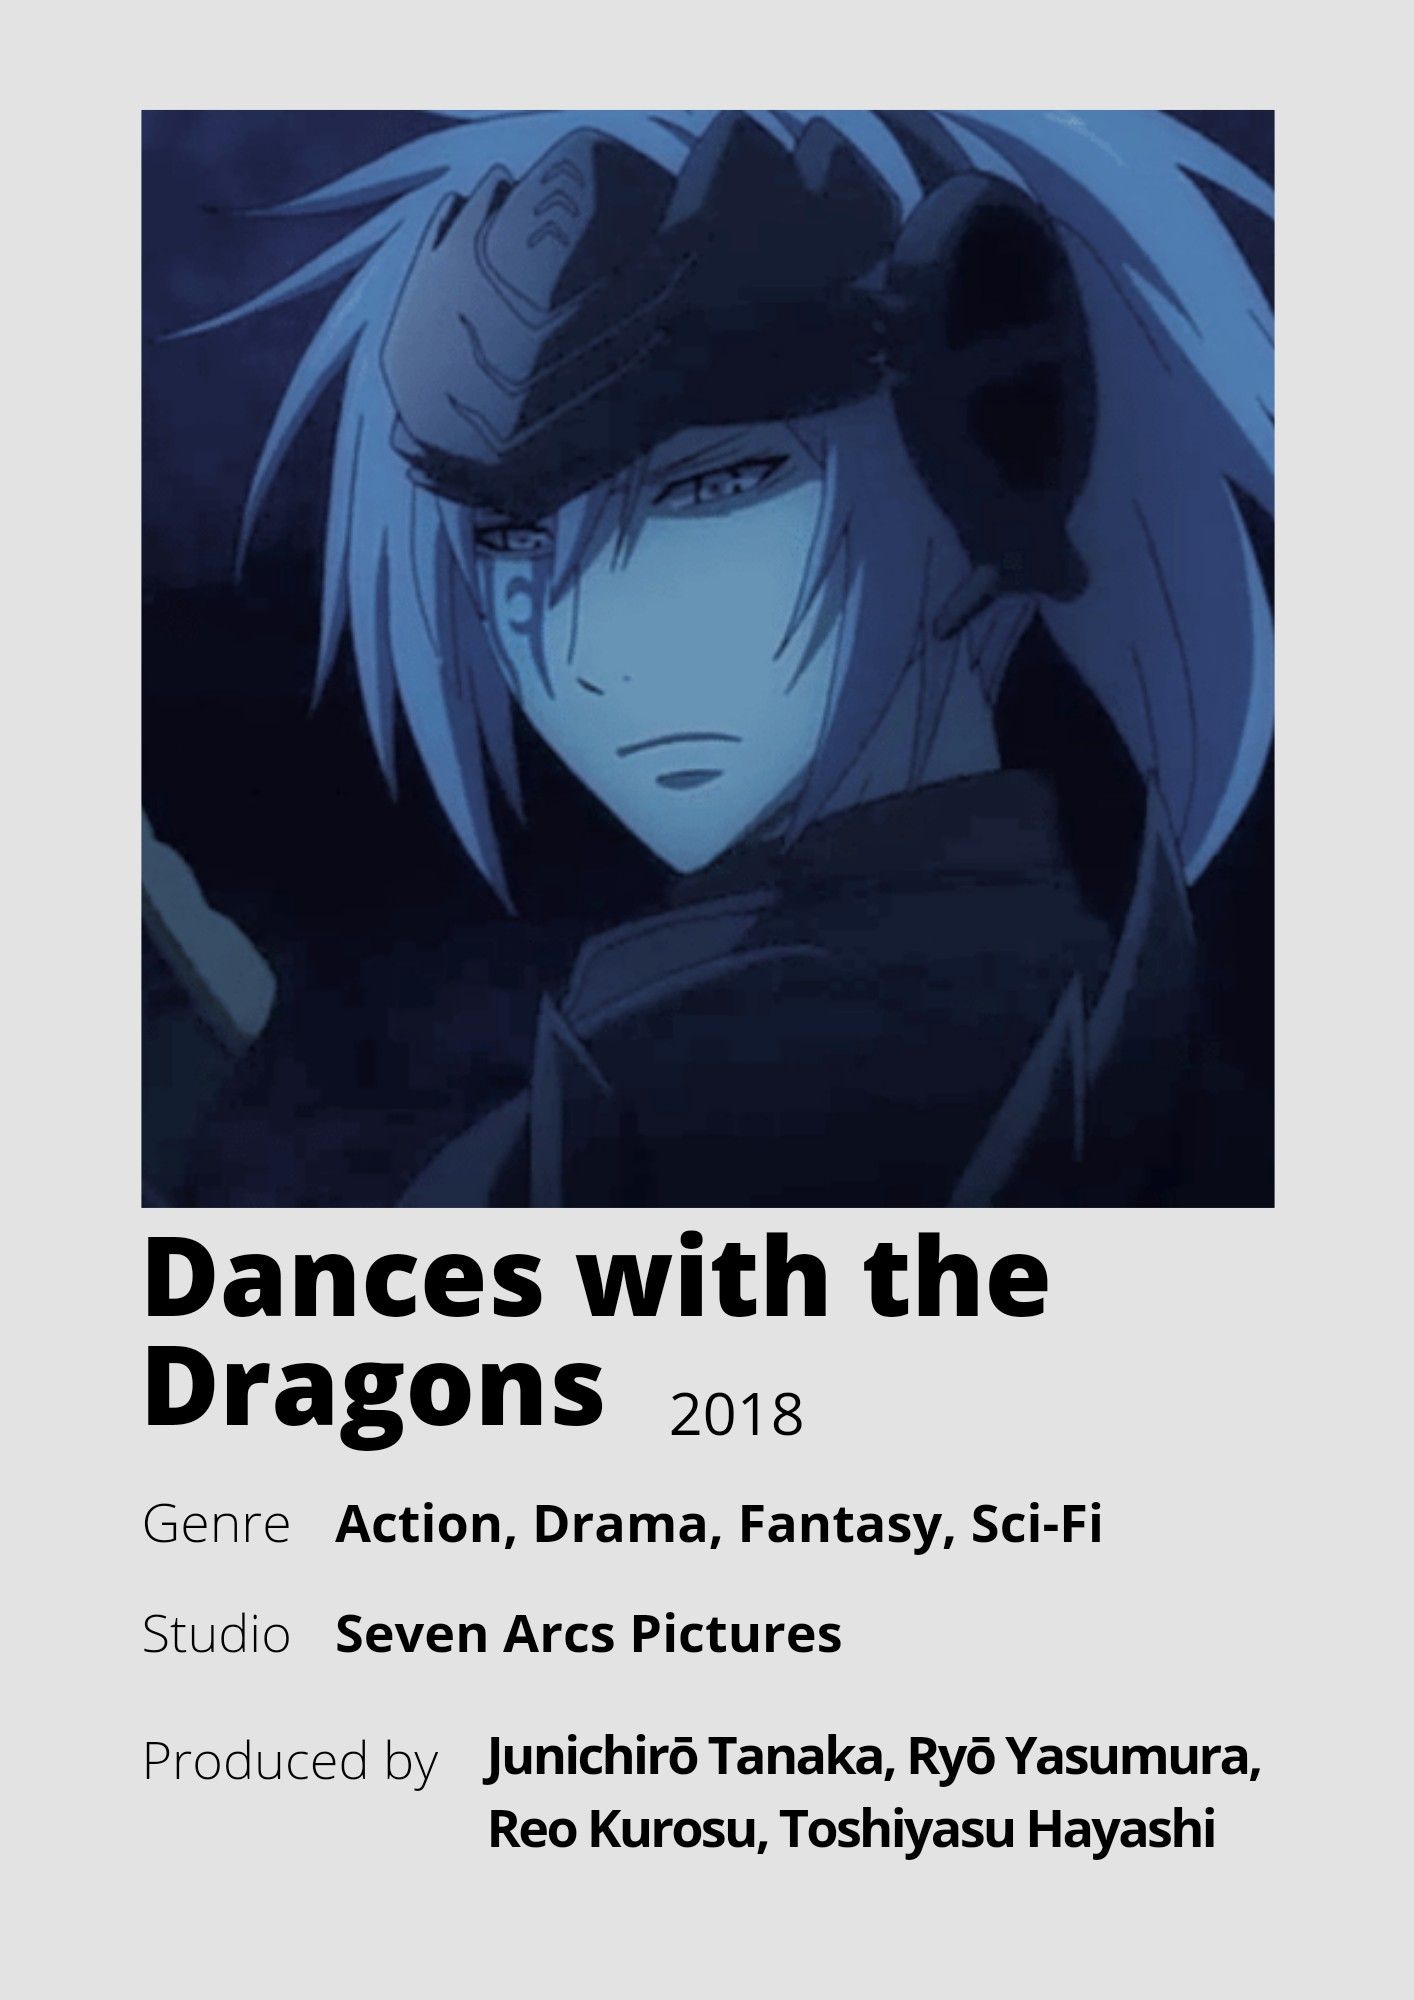 Dances with the Dragons